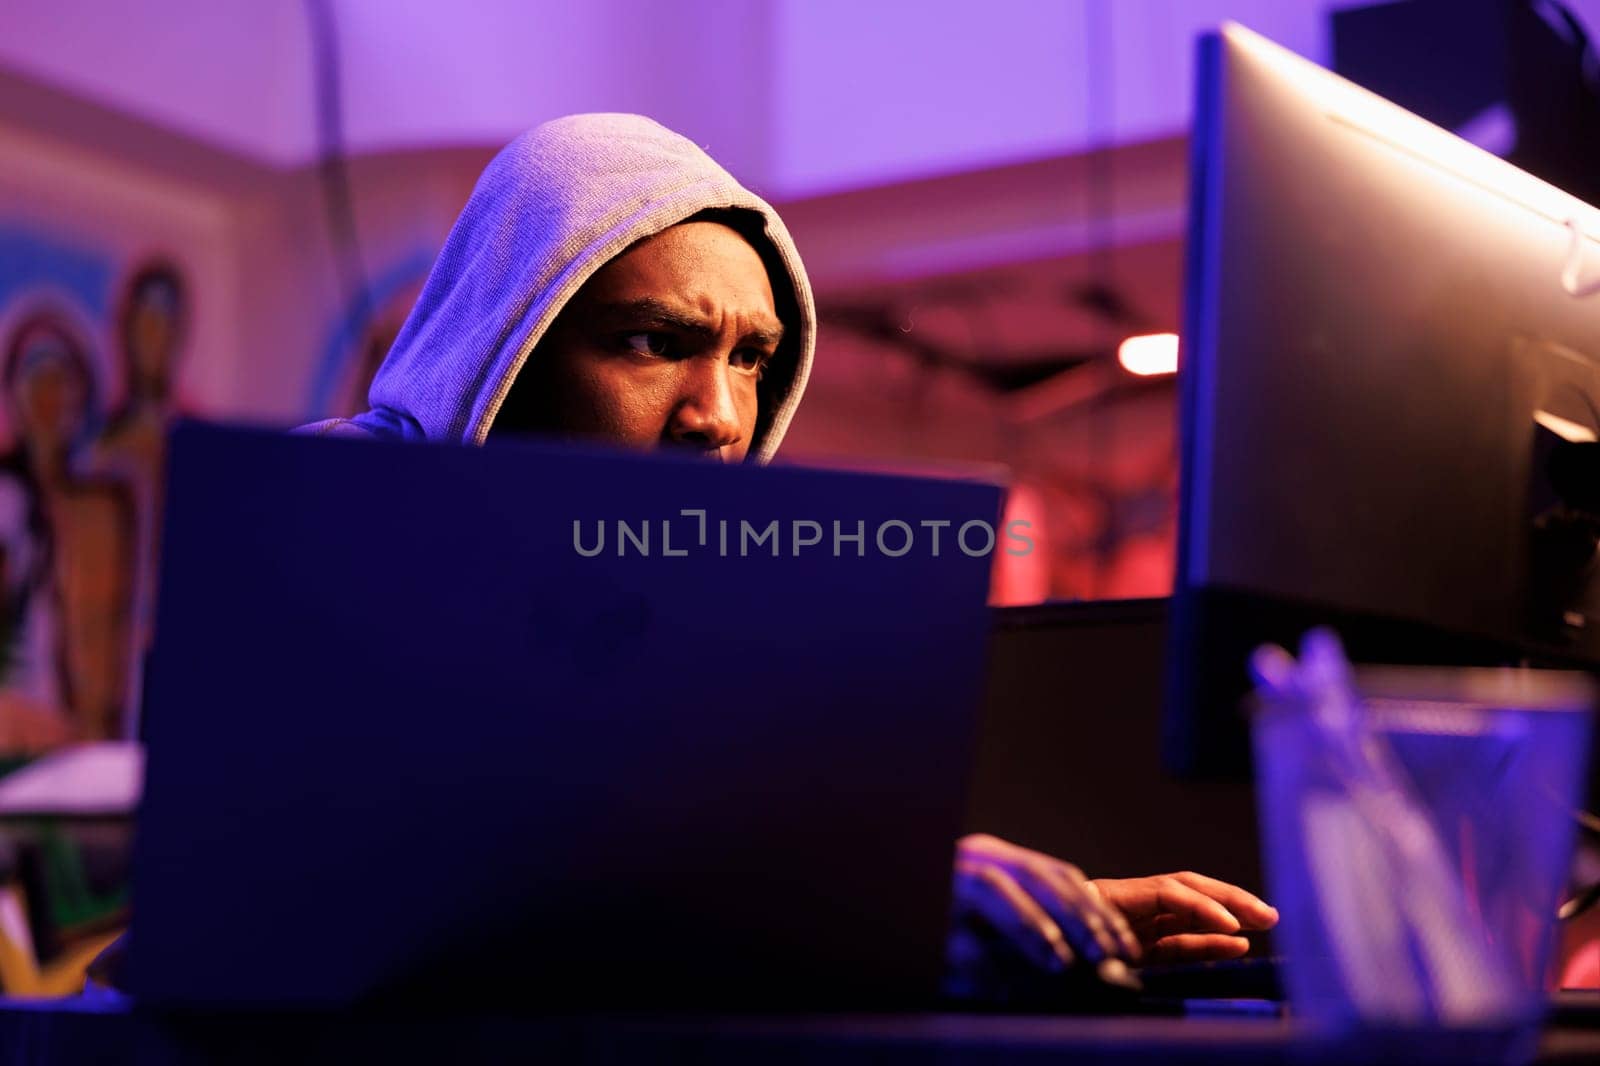 Focused african american scammer cracking password to gain access to system. Concentrated hacker in hood hacking database and breaching data in dark hideout place with neon light